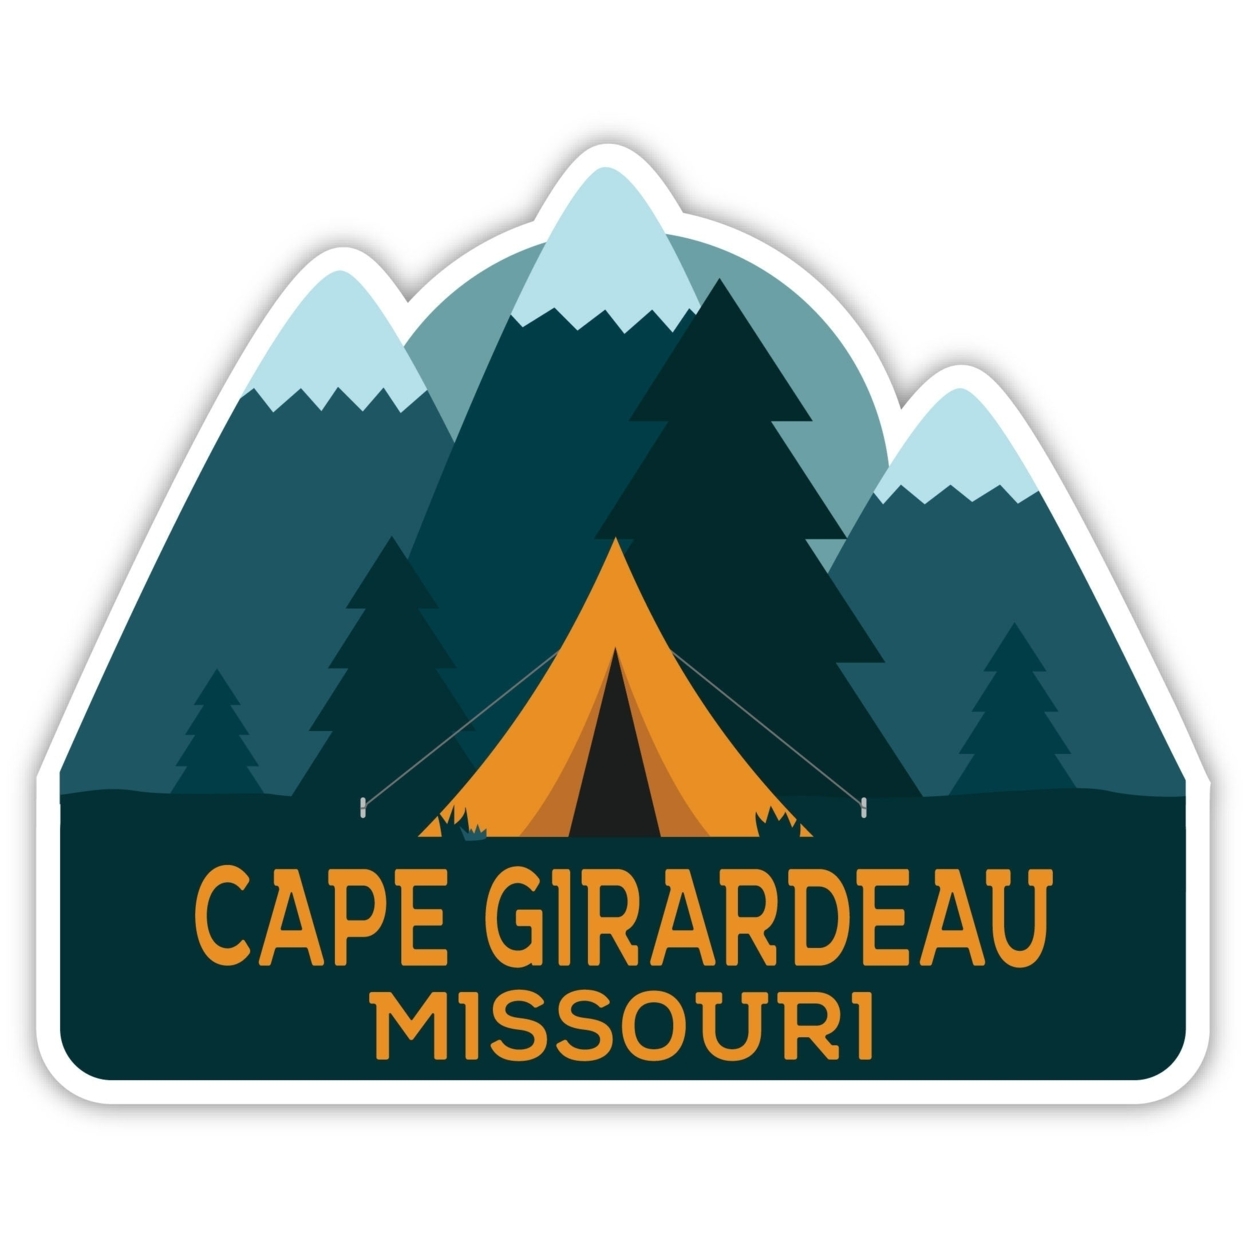 Cape Girardeau Missouri Souvenir Decorative Stickers (Choose Theme And Size) - 4-Pack, 12-Inch, Great Outdoors